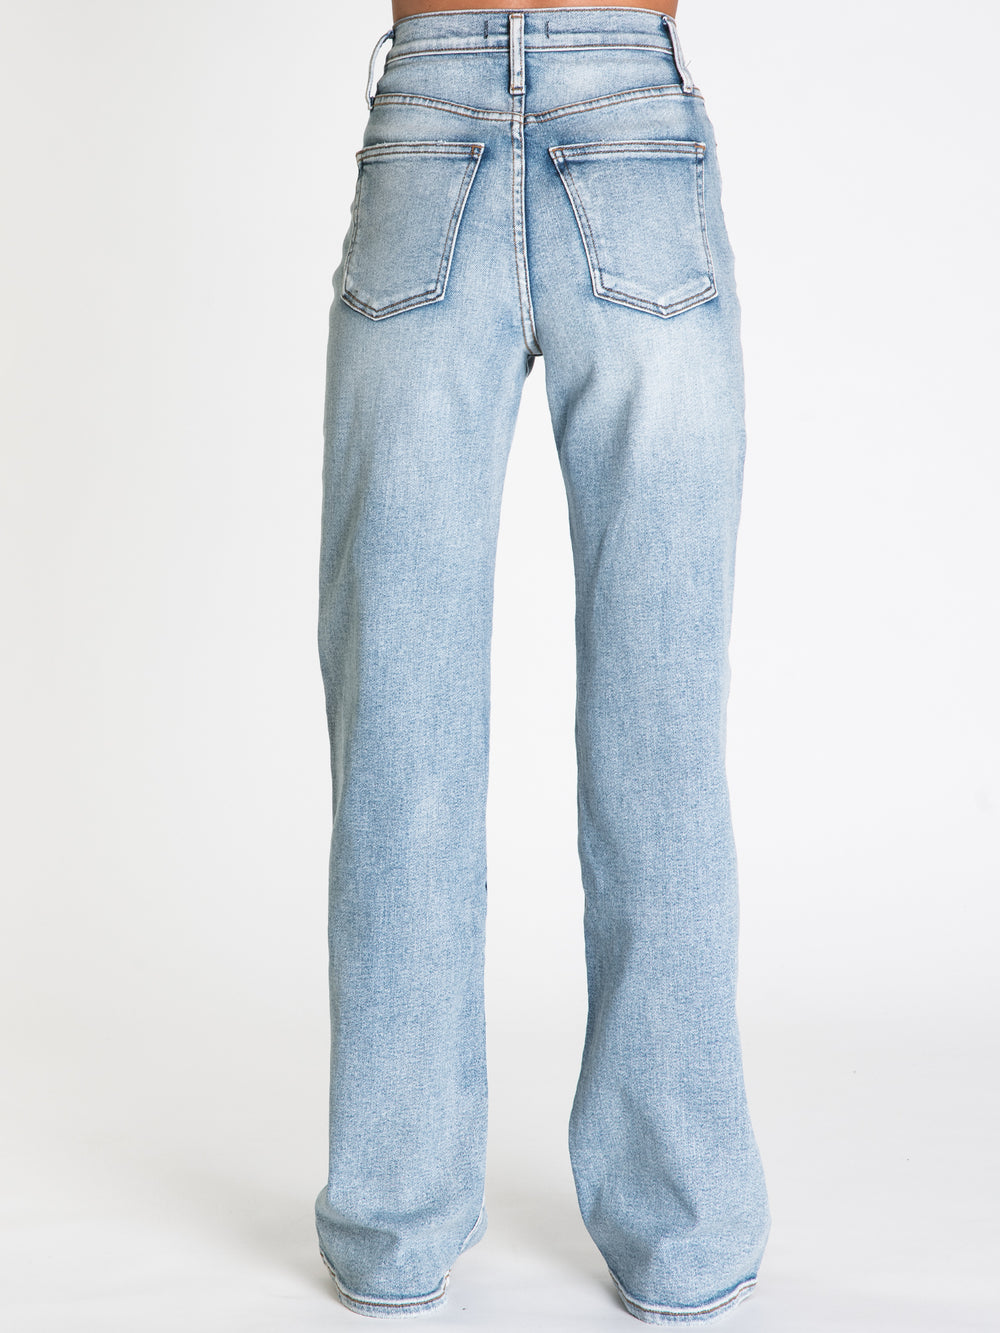 SILVER JEANS 33" HIGH RISE HIGHLY DESIRABLE JEAN - CLEARANCE